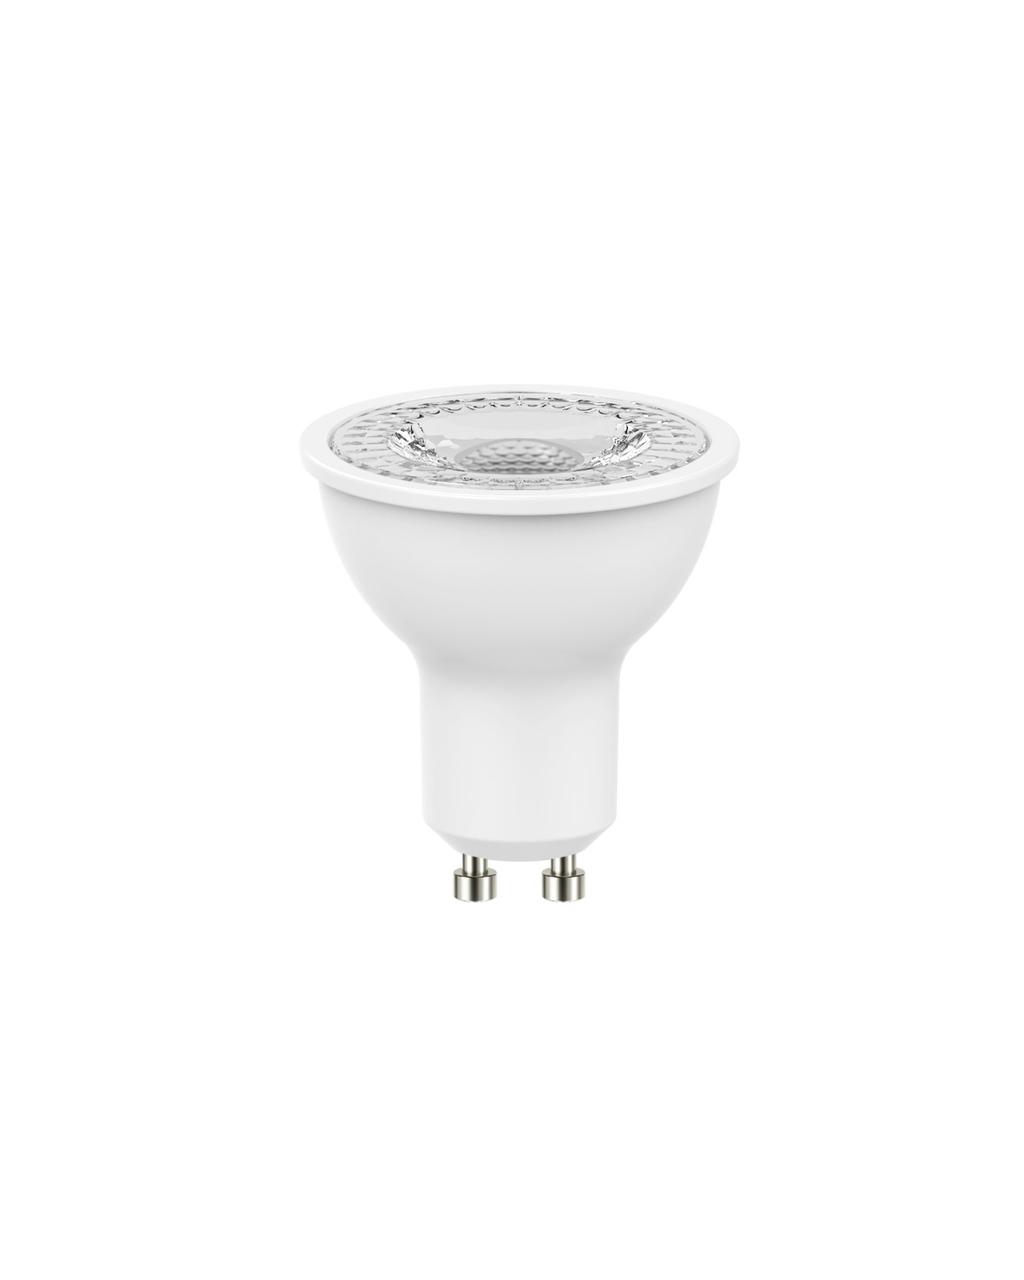 * LED SPOTLIGHTS PRODUCT FEATURES True 2700-3000k warm white colour and non options High quality chip and driver for long life expectancy Up to 85% energy saving over Halogen lamps Integrated heat